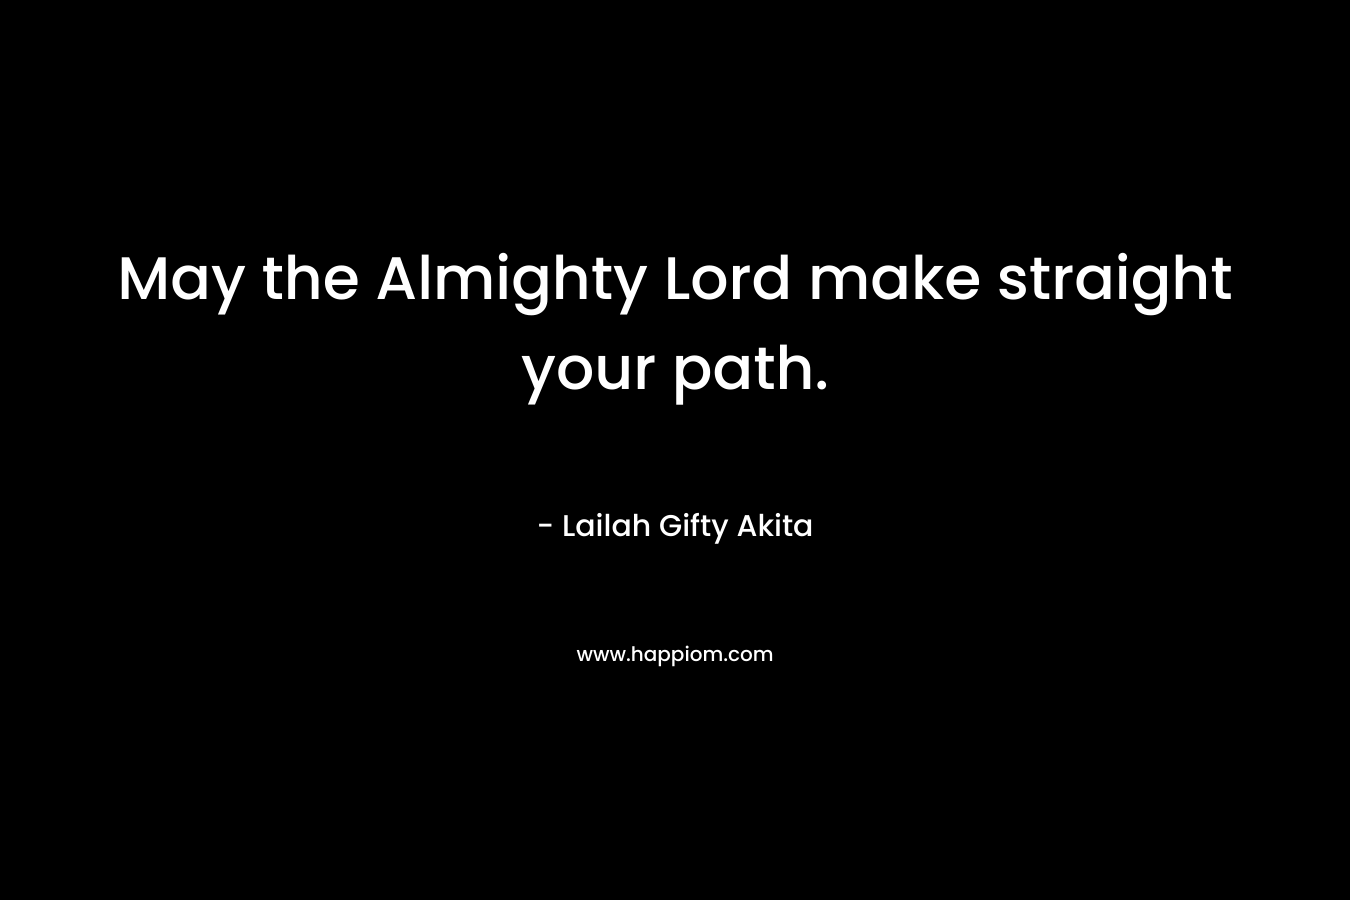 May the Almighty Lord make straight your path.